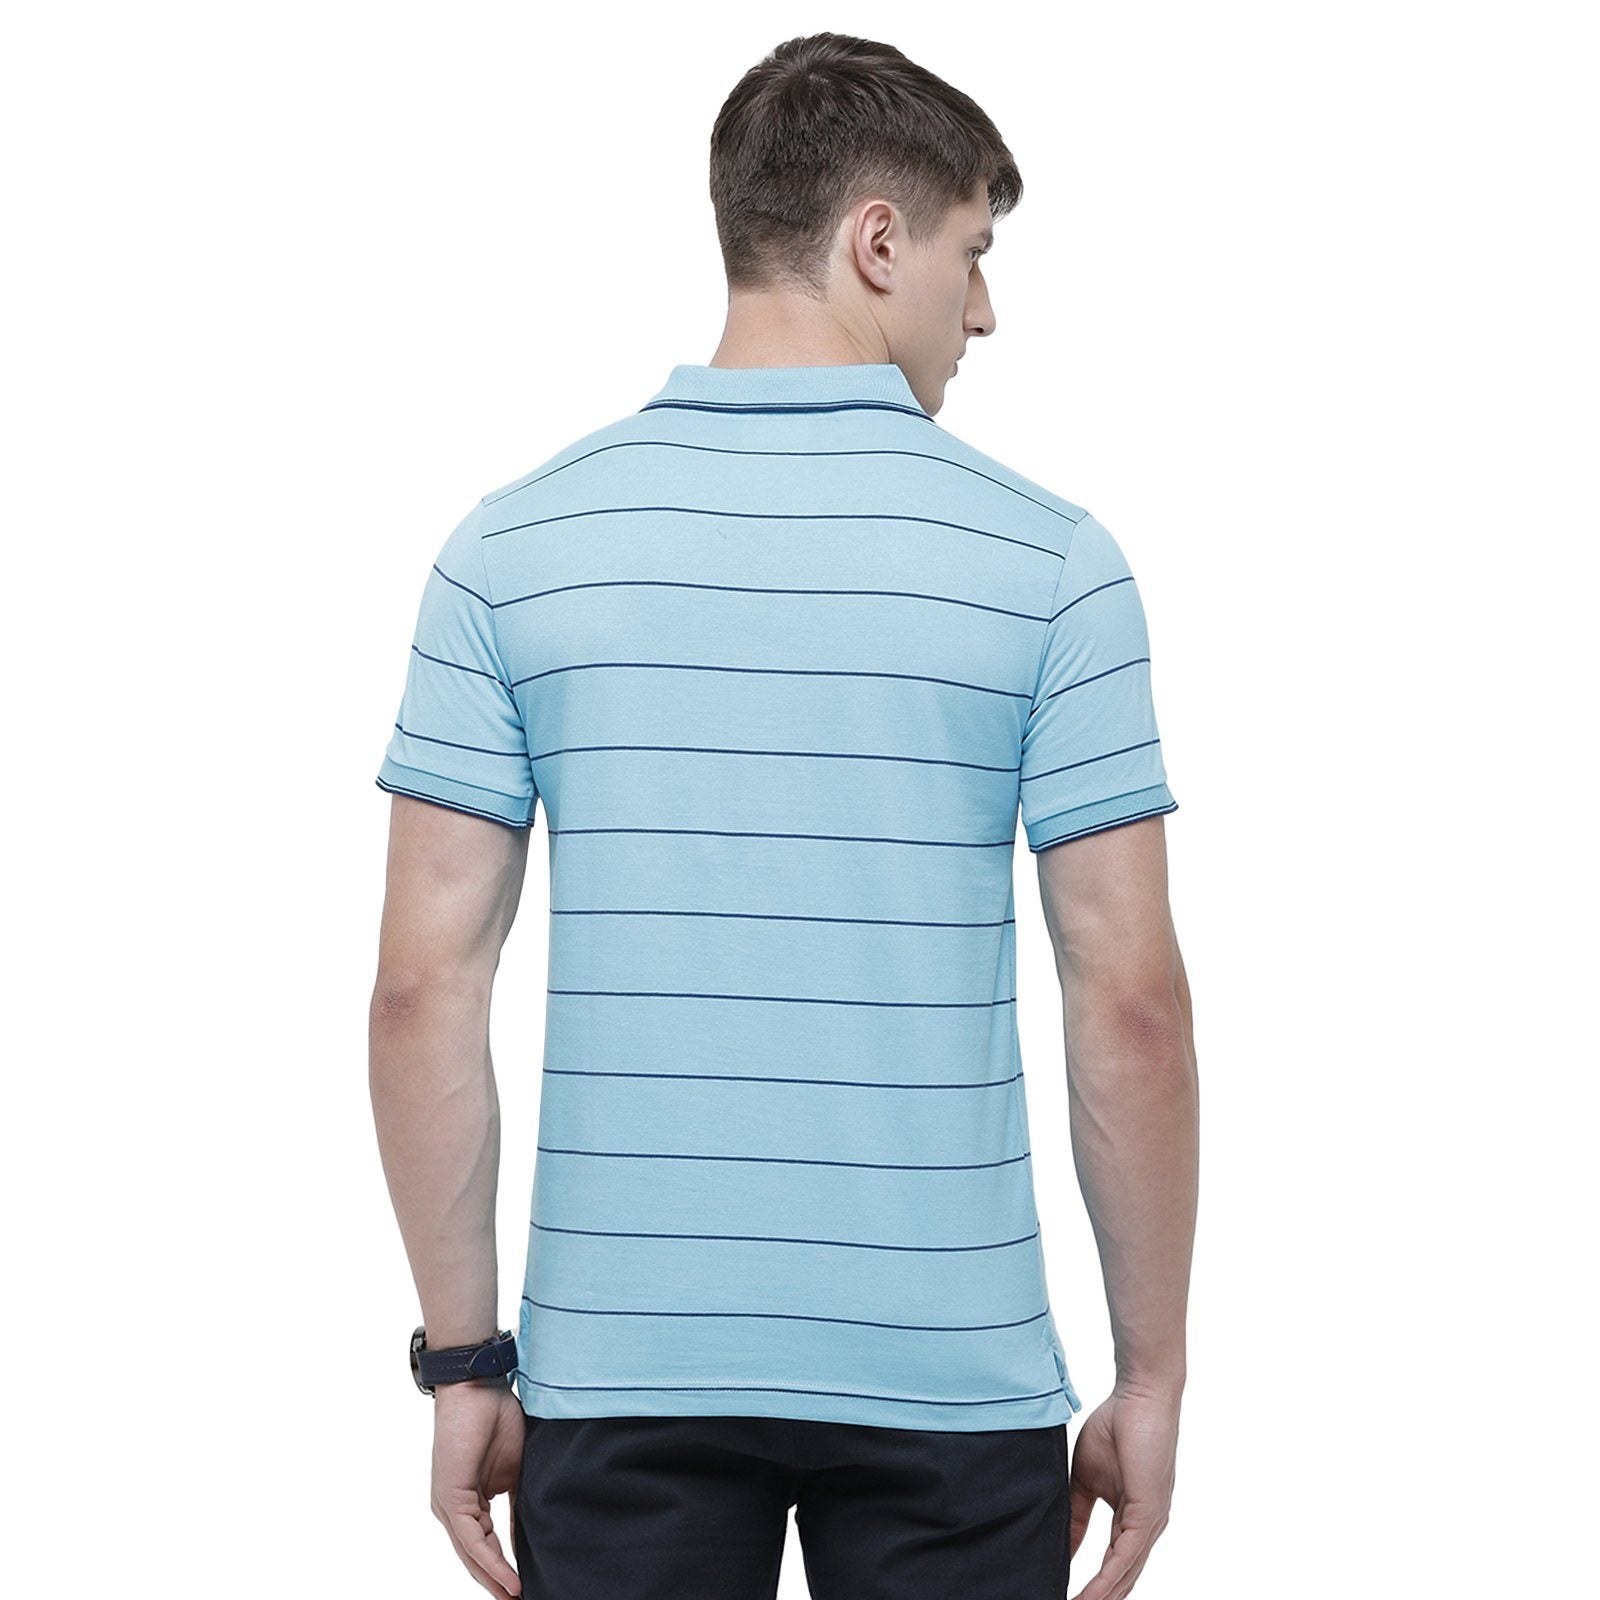 Classic polo Men's Polo Neck Half Sleeve Turquoise Cotton Slim Fit T-Shirt CPEG - 251 A SF P T-shirt Classic Polo 